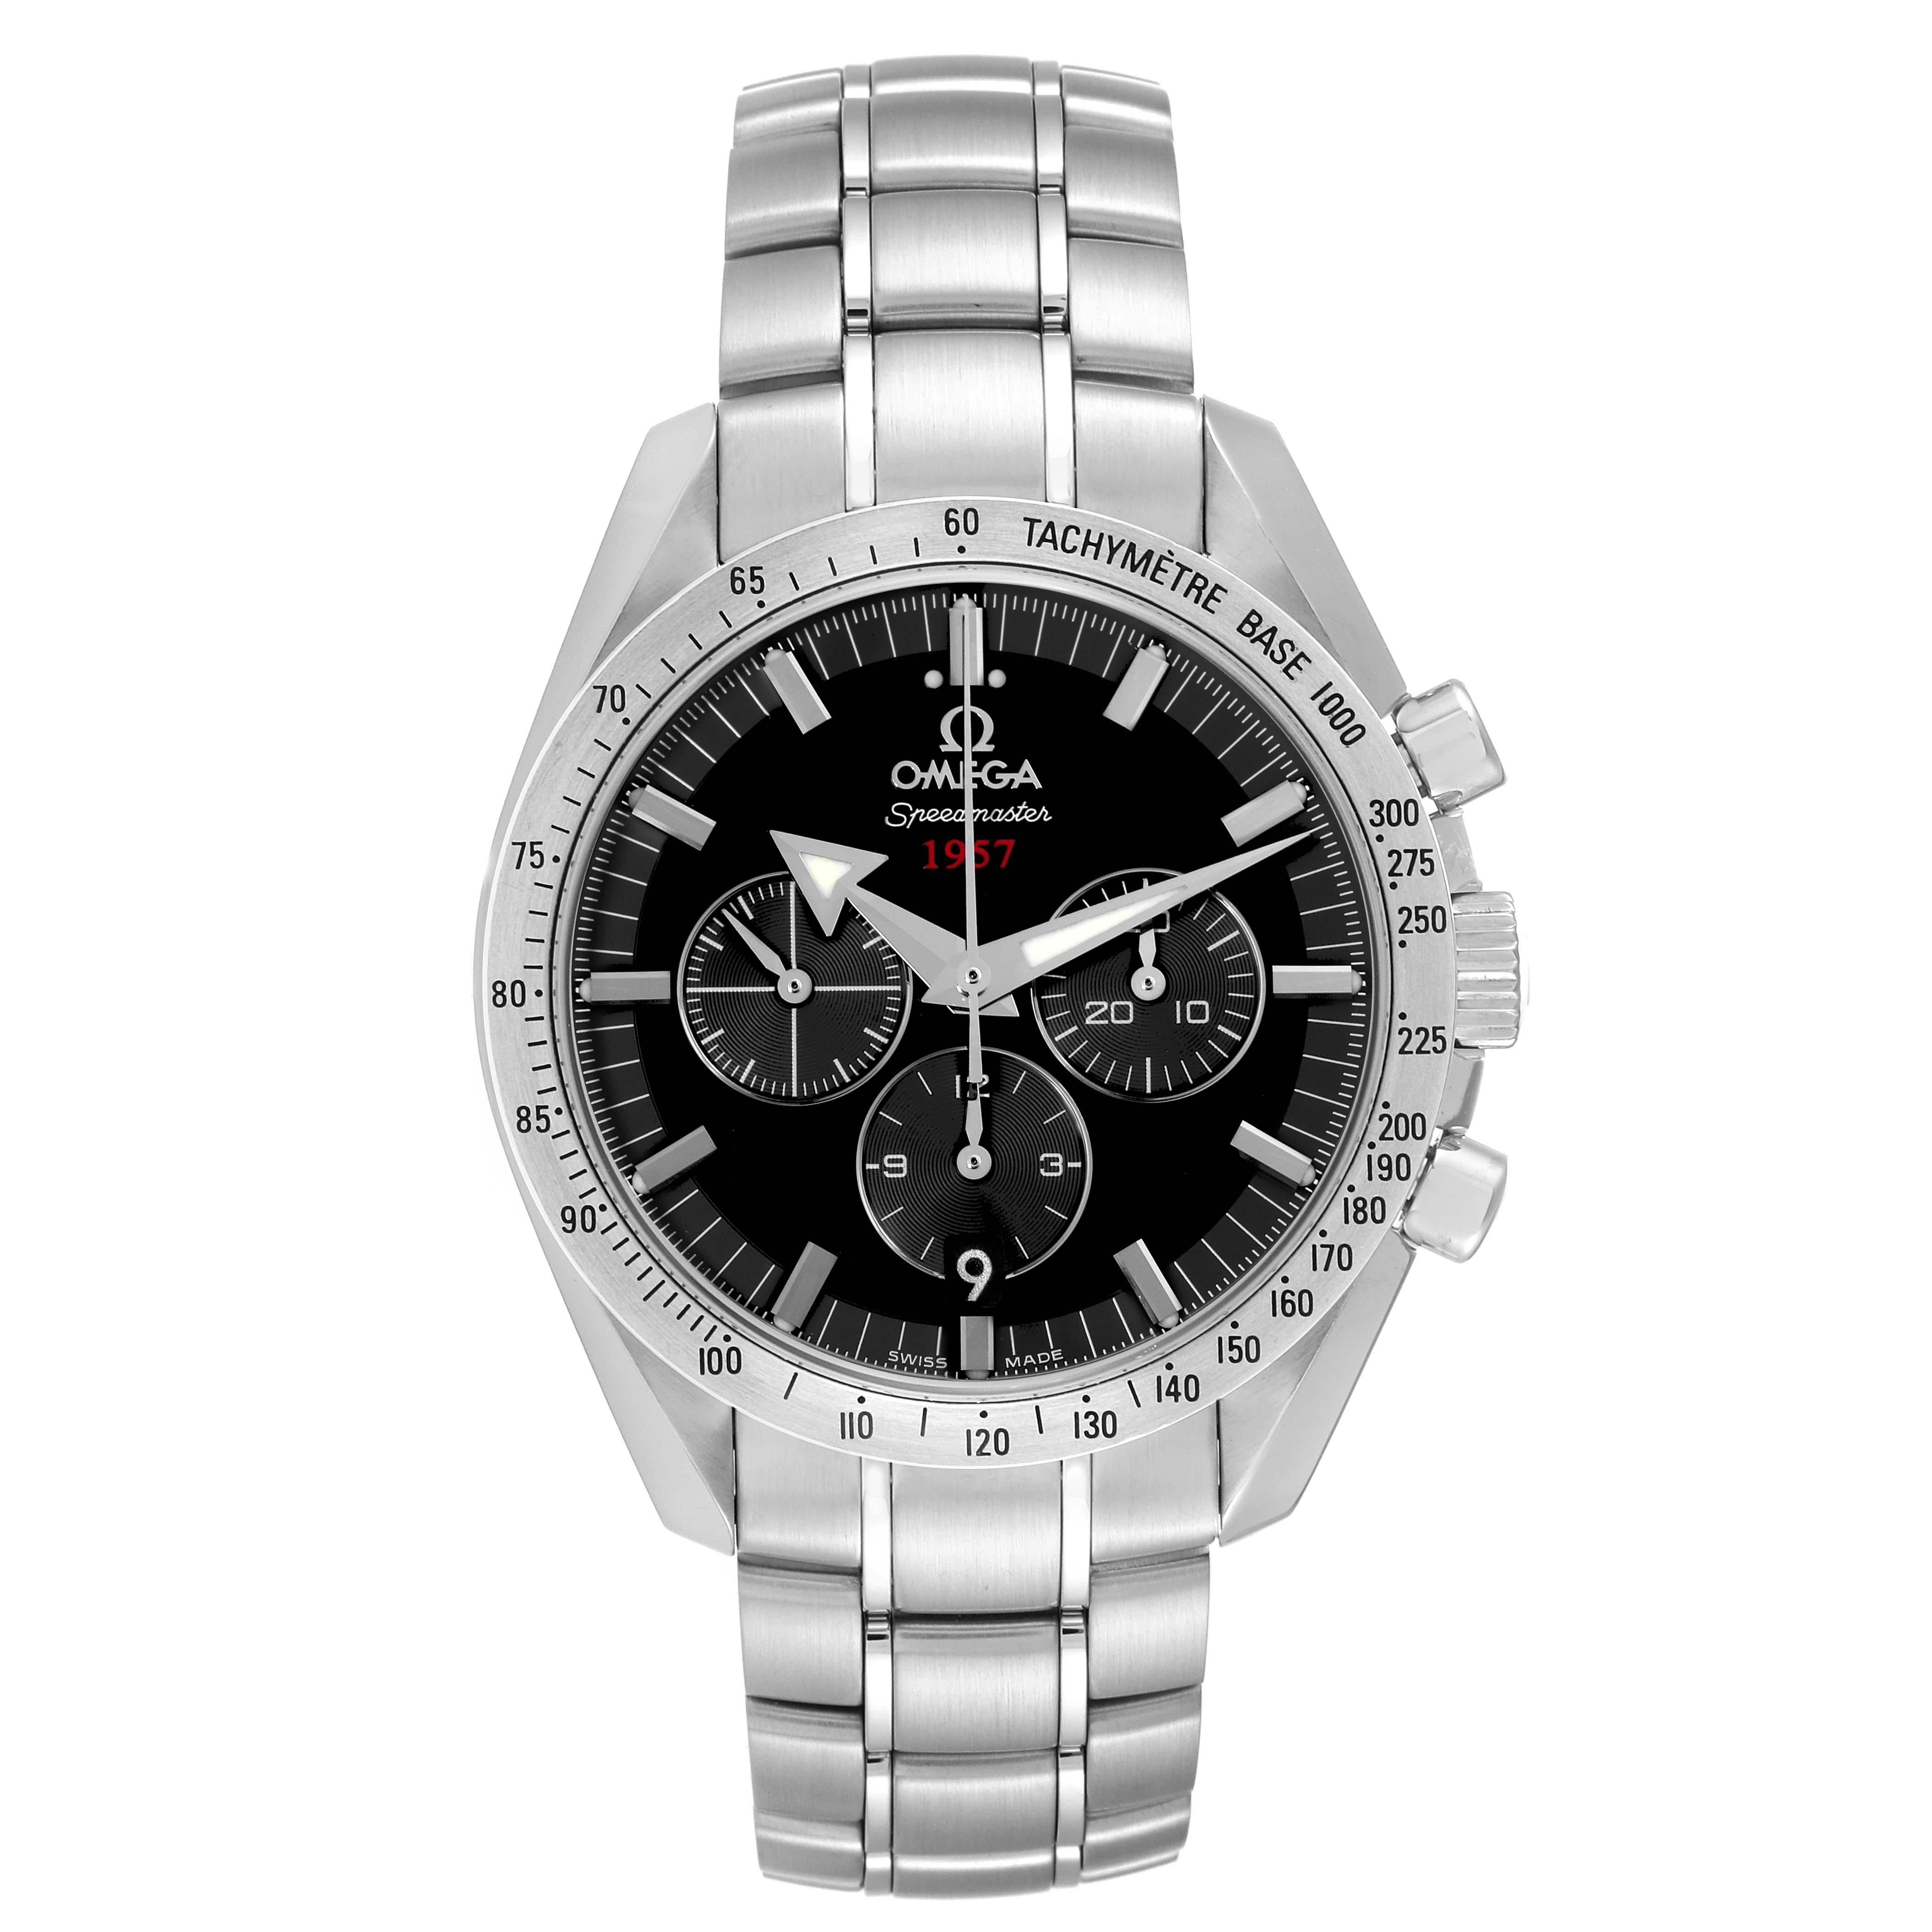 Omega Speedmaster Broad Arrow 1957 Steel Mens Watch 321.10.42.50.01.001 Card. Automatic self-winding chronograph movement with column wheel mechanism and Co-Axial Escapement. Stainless steel round case 42.0 mm in diameter. Transparent exhibition